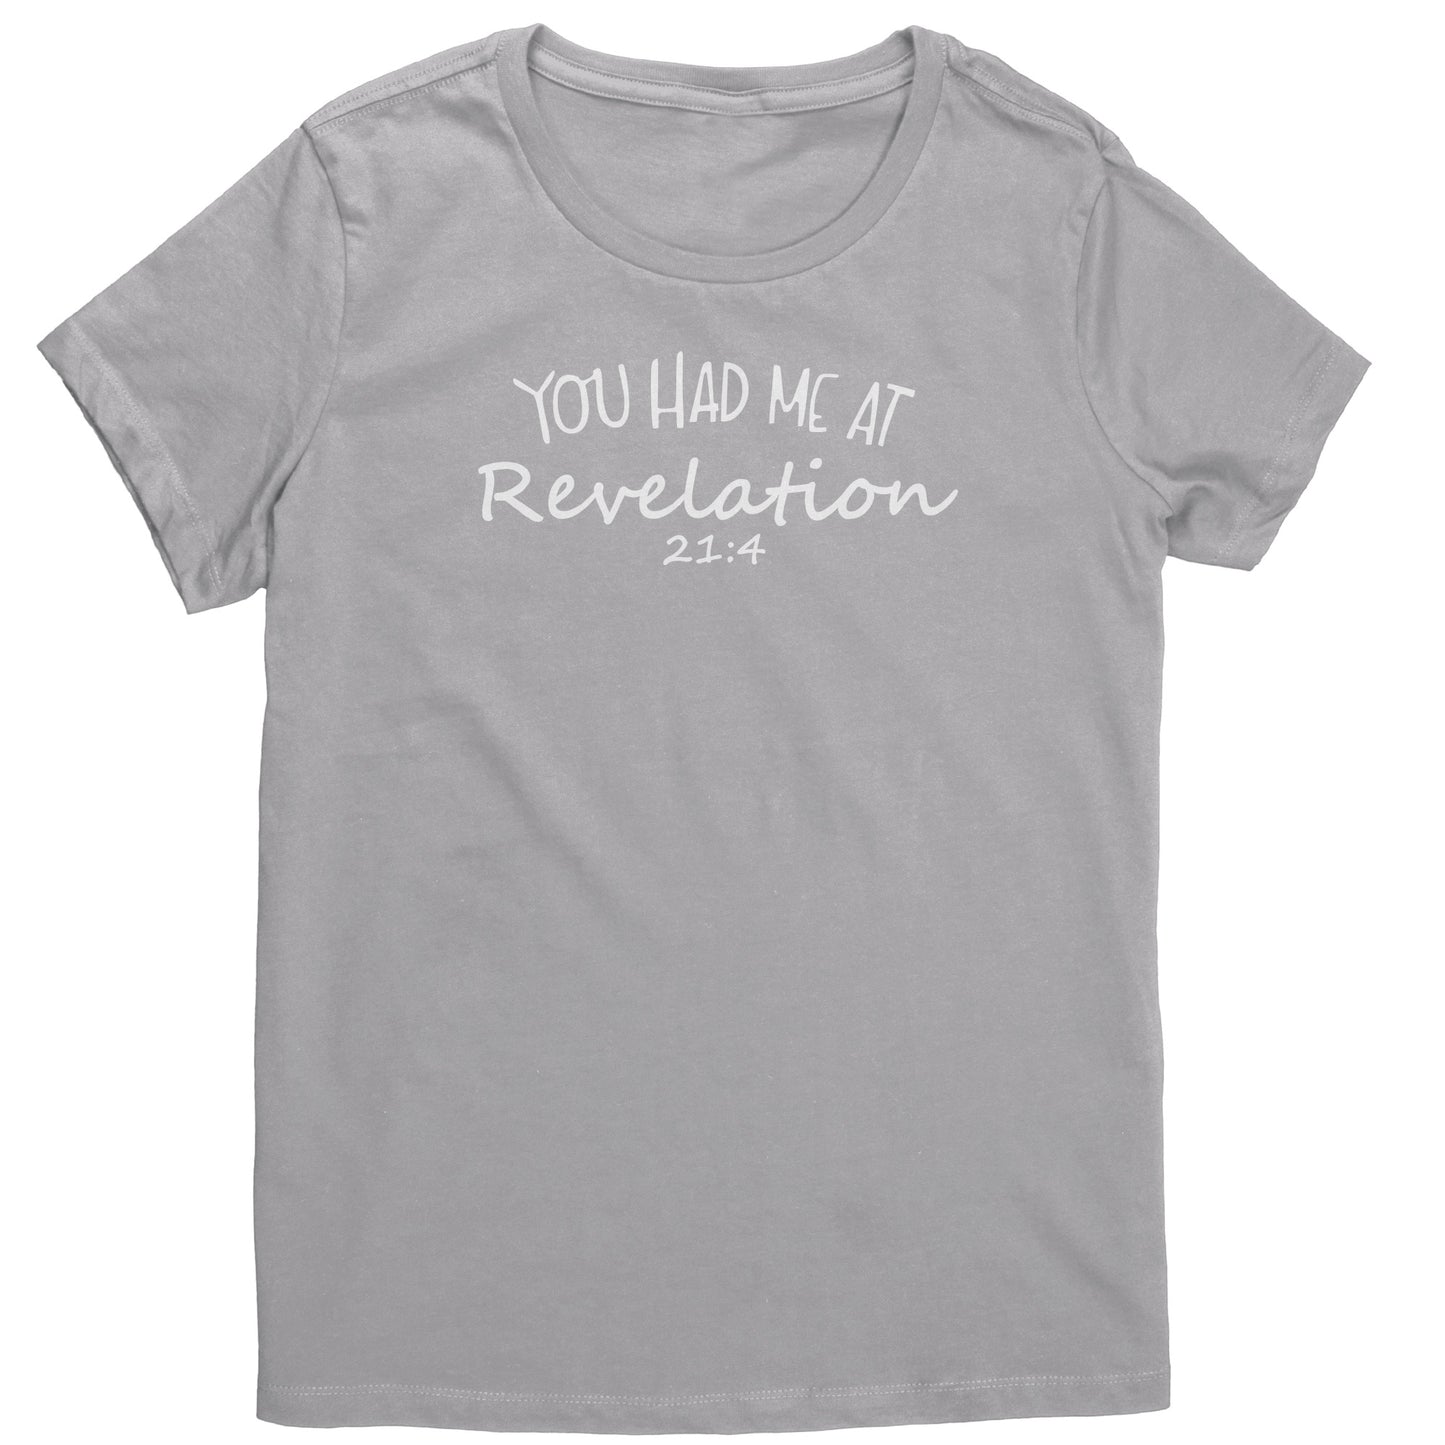 You Had Me At Revelation 21:4 Women's T-Shirt Part 2